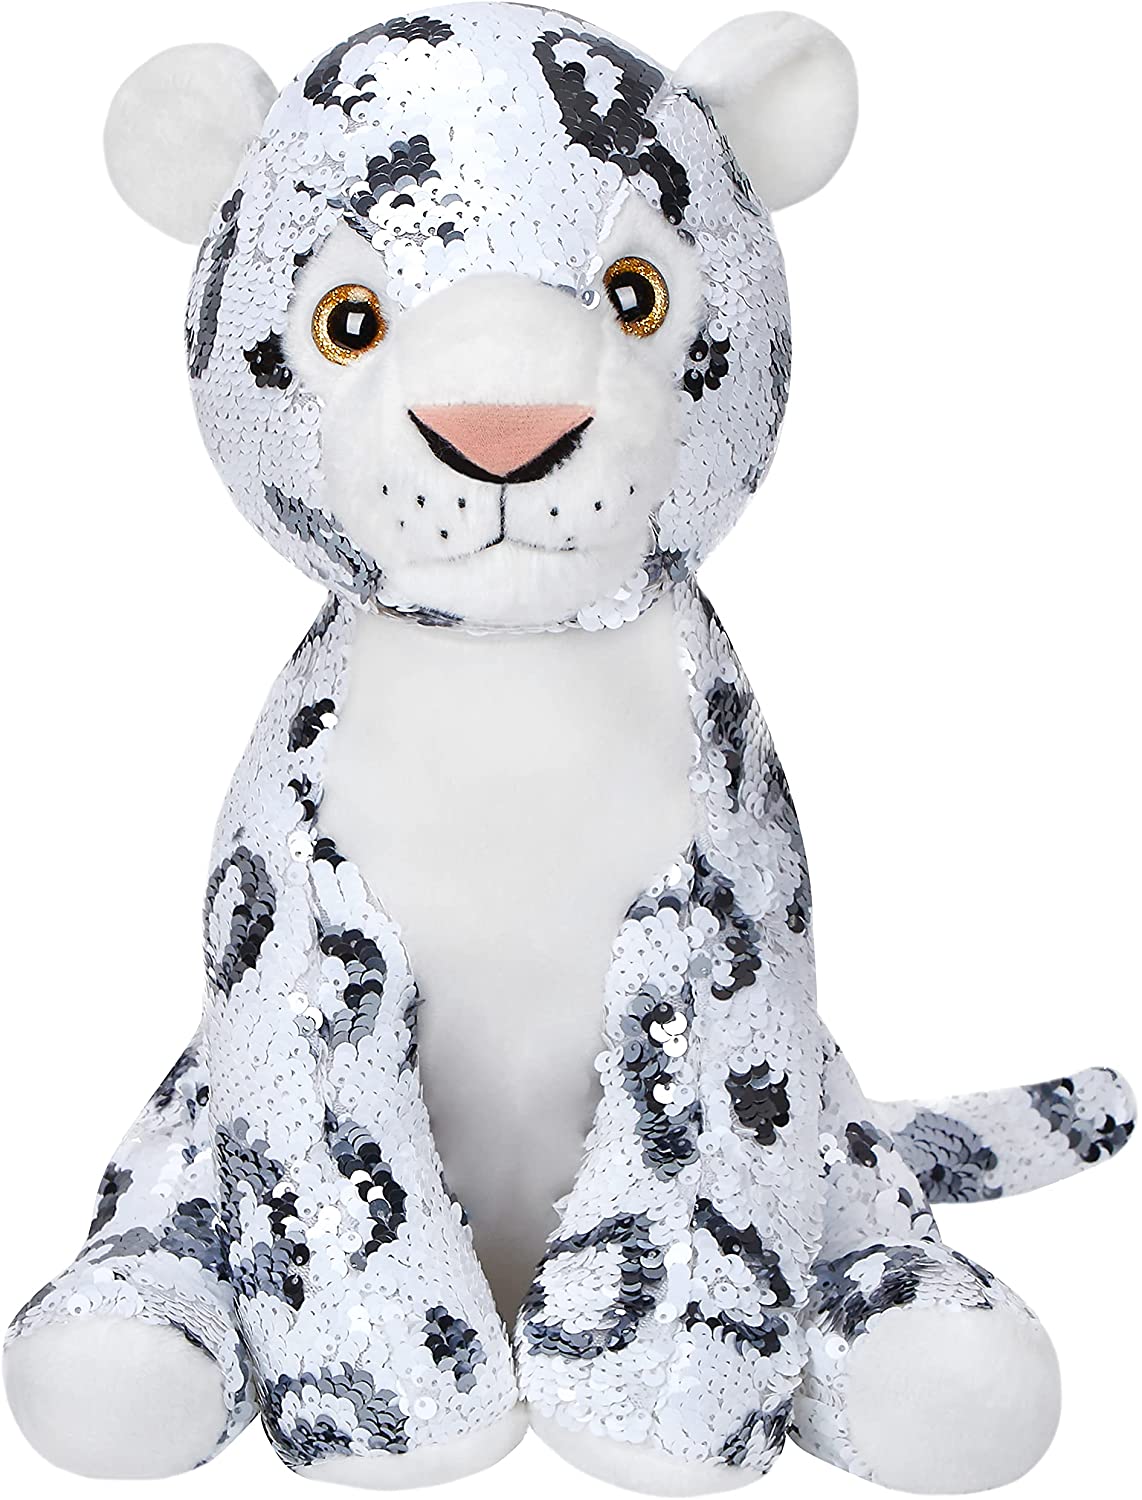 Snow Leopard Design Animal Plush Toy for Kids Babies Cotton Stuffed Toy NEW 